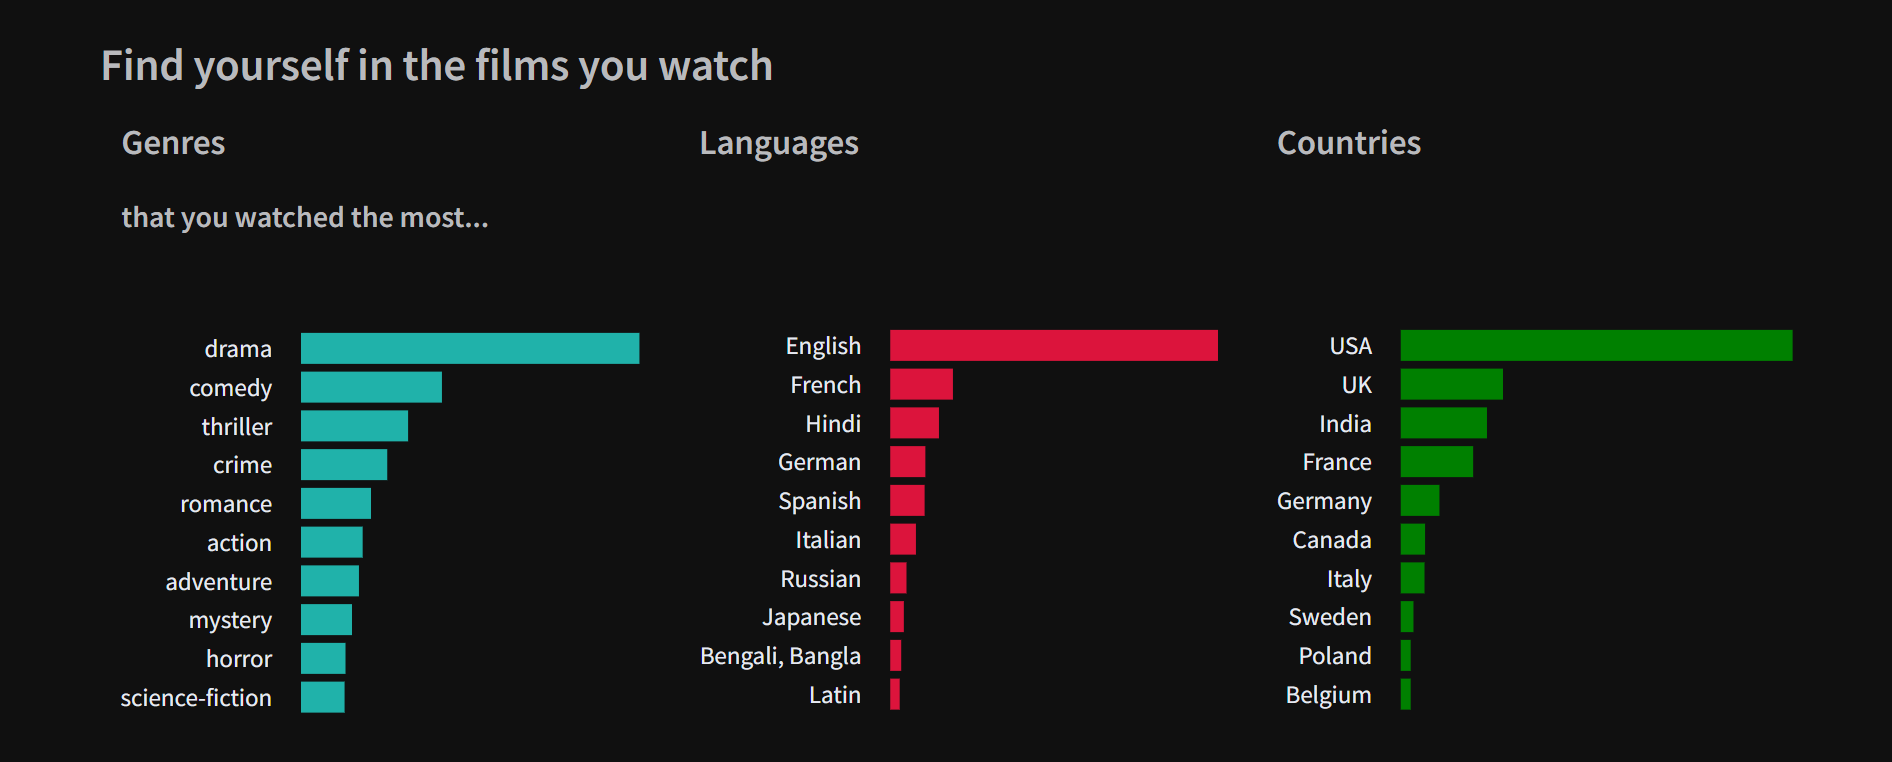 Different genres and languages